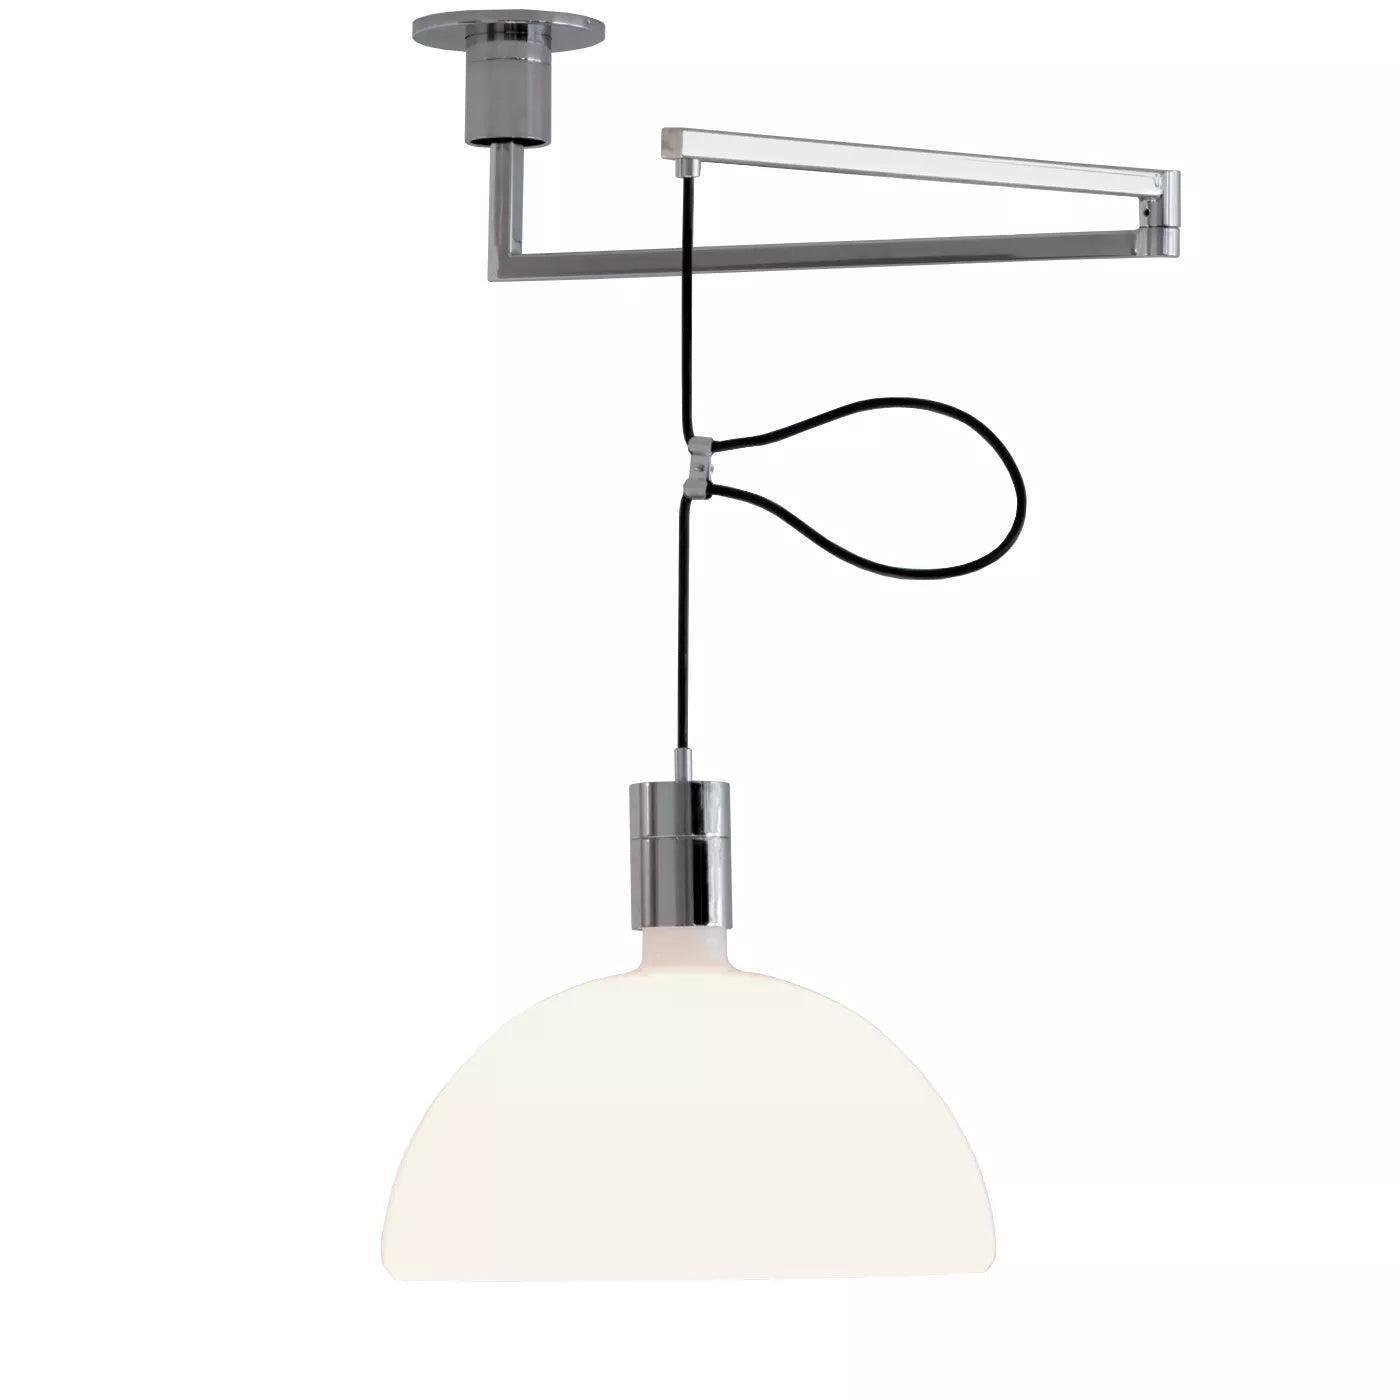 AS41C Pendant Light with a diameter of 13.8 inches (35cm), in a Chrome and White finish.